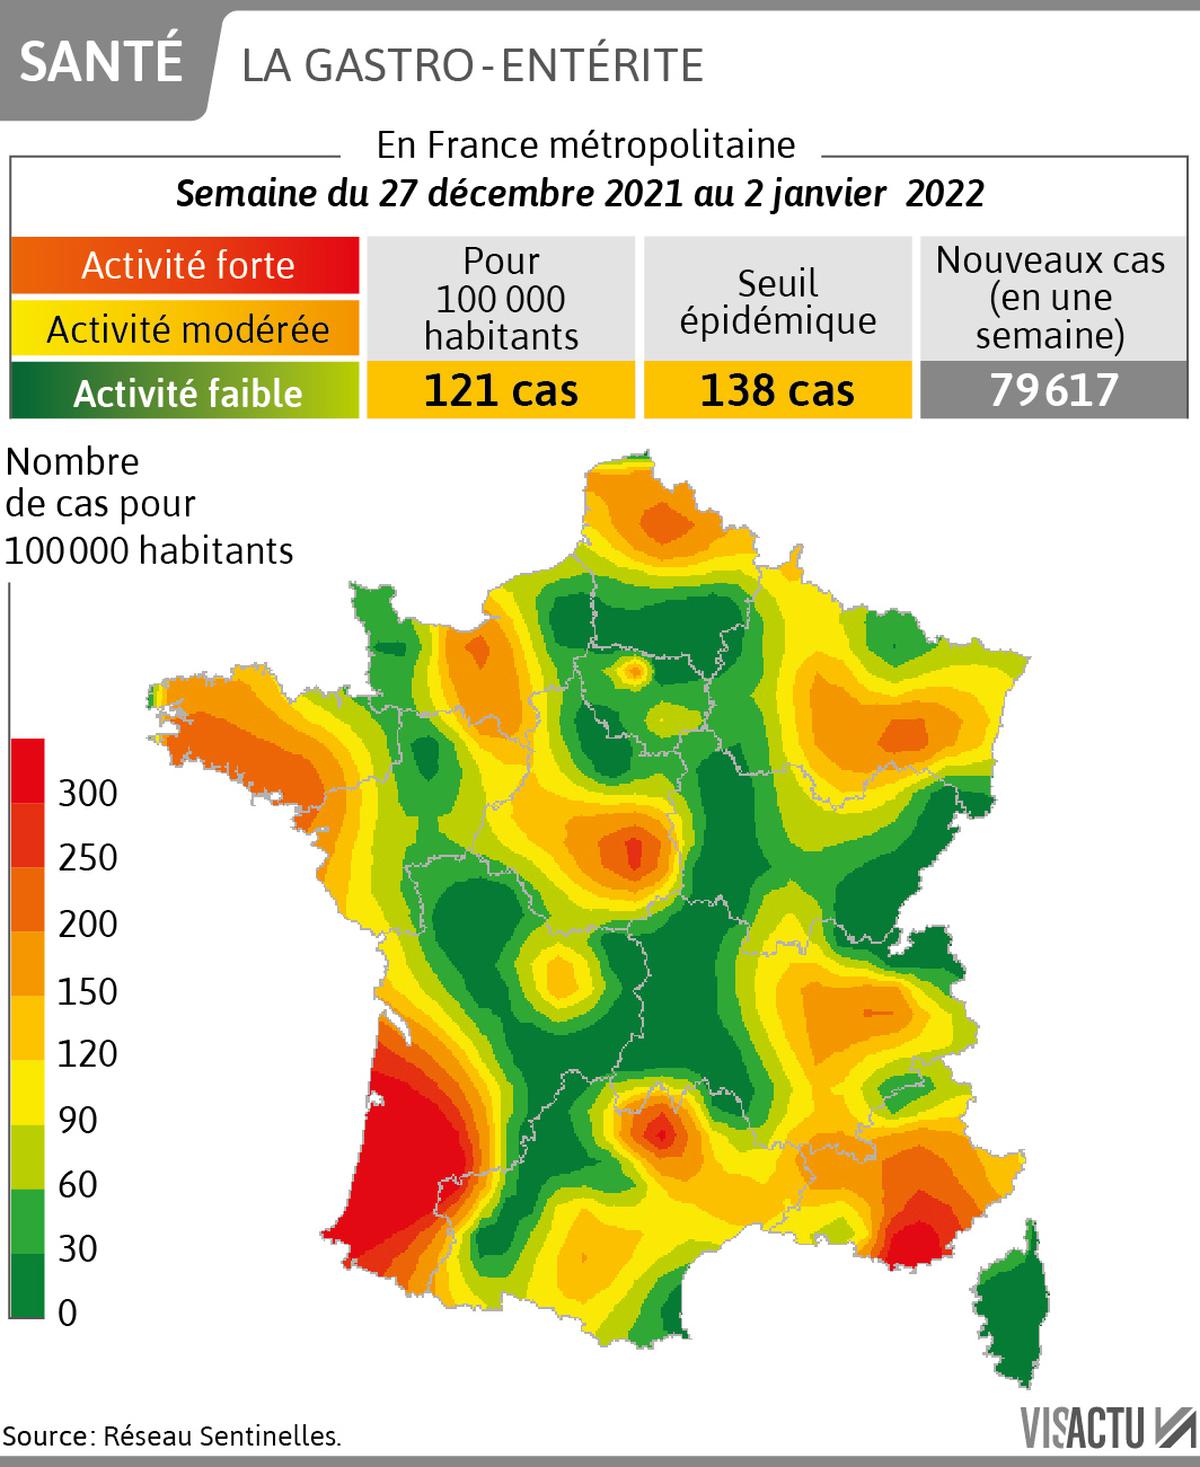 Epidemic threshold reached in Nouvelle-Aquitaine

